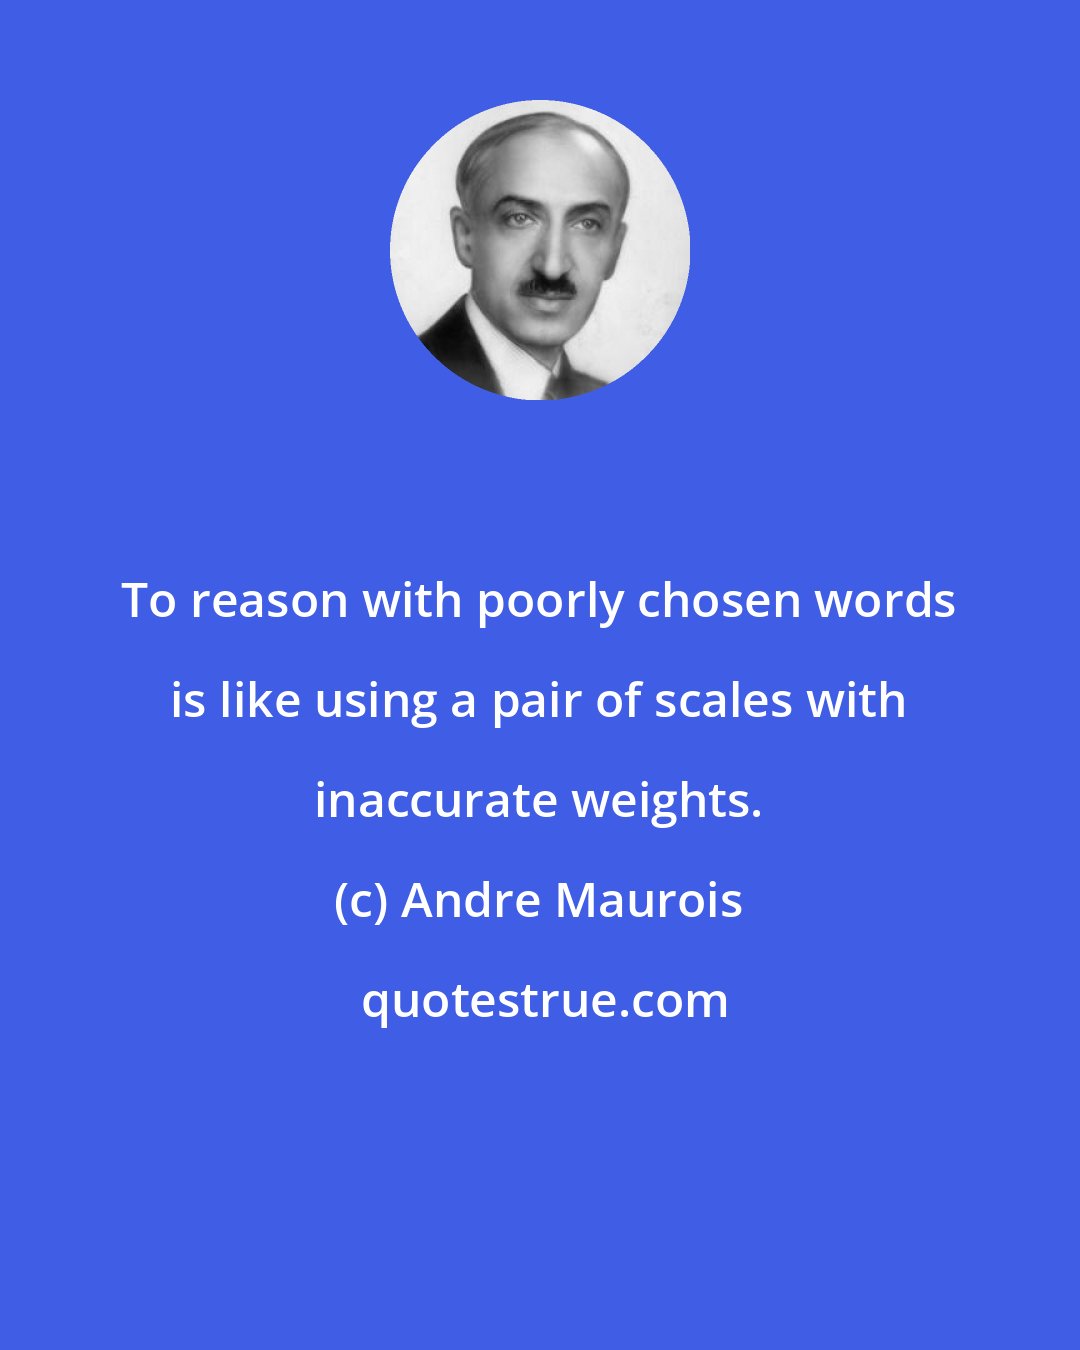 Andre Maurois: To reason with poorly chosen words is like using a pair of scales with inaccurate weights.